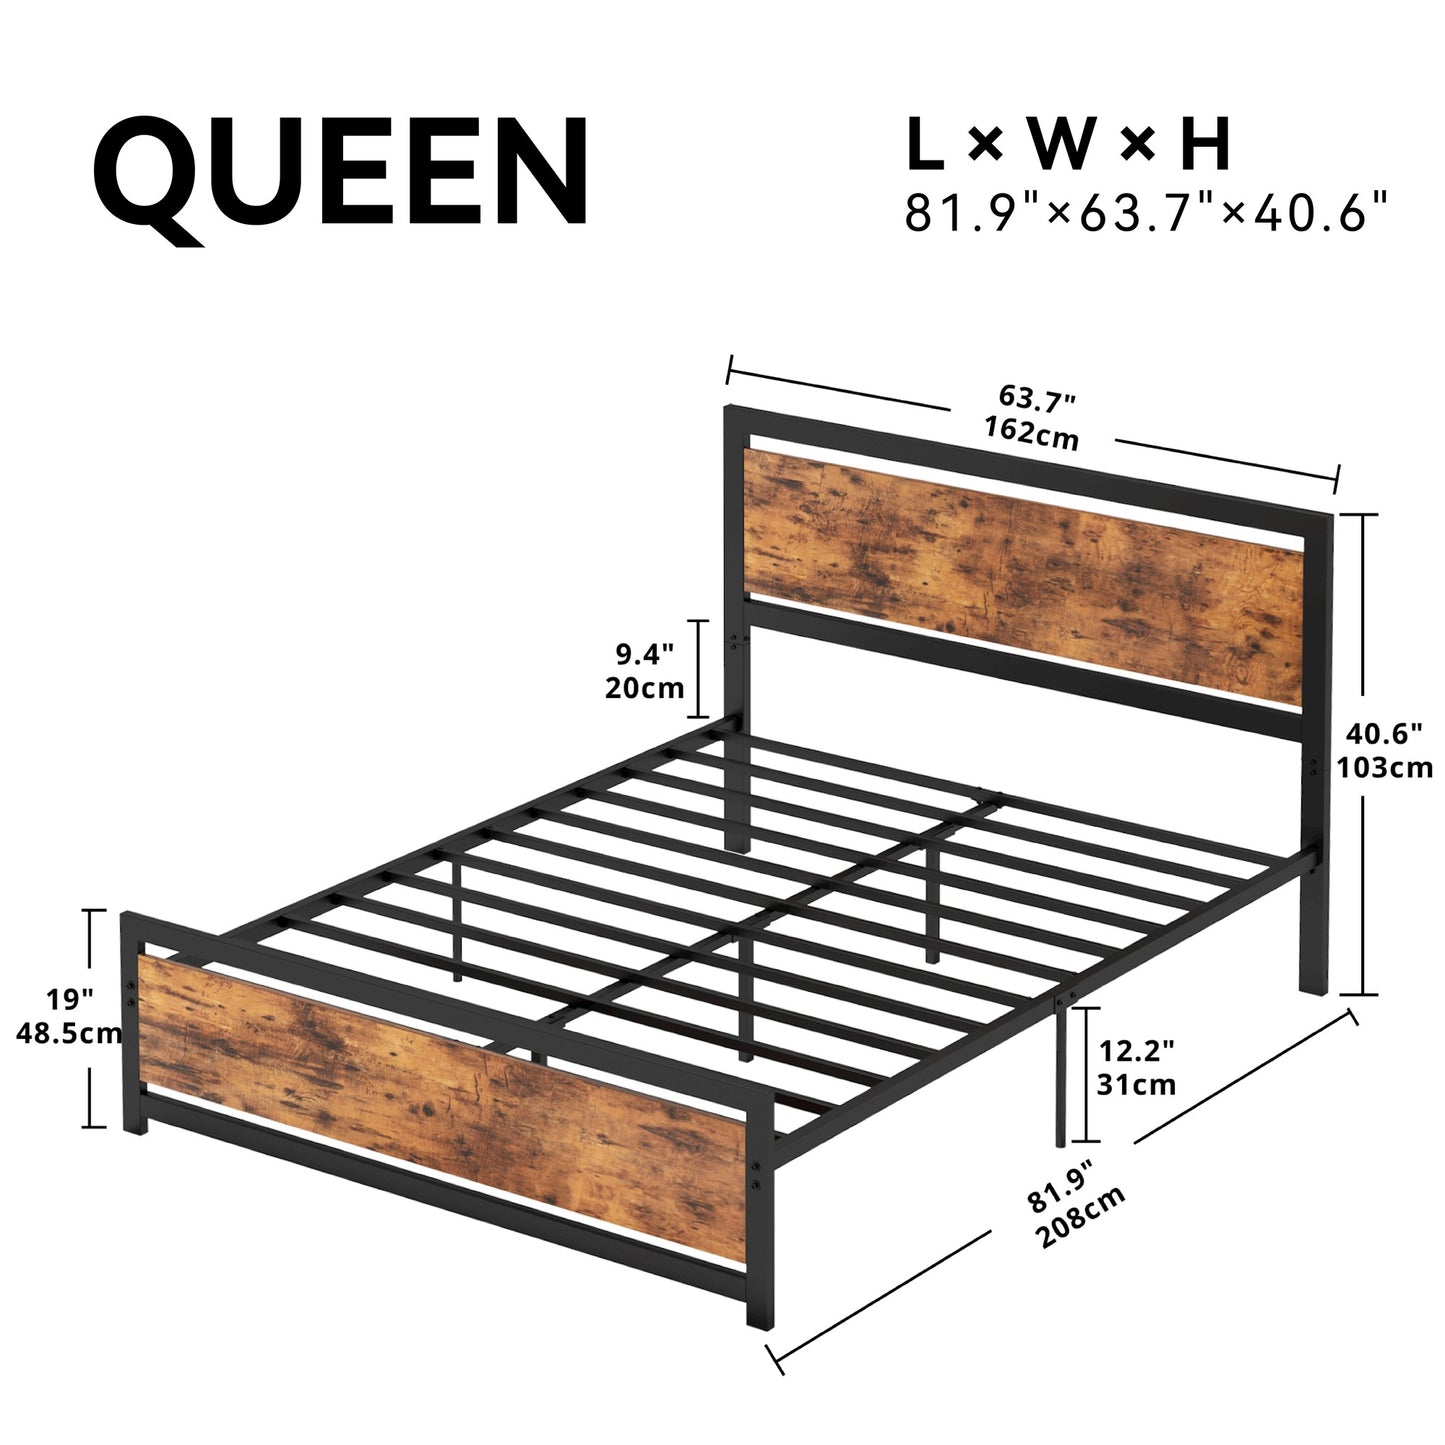 41" Bed Frame with Headboard and Footboard